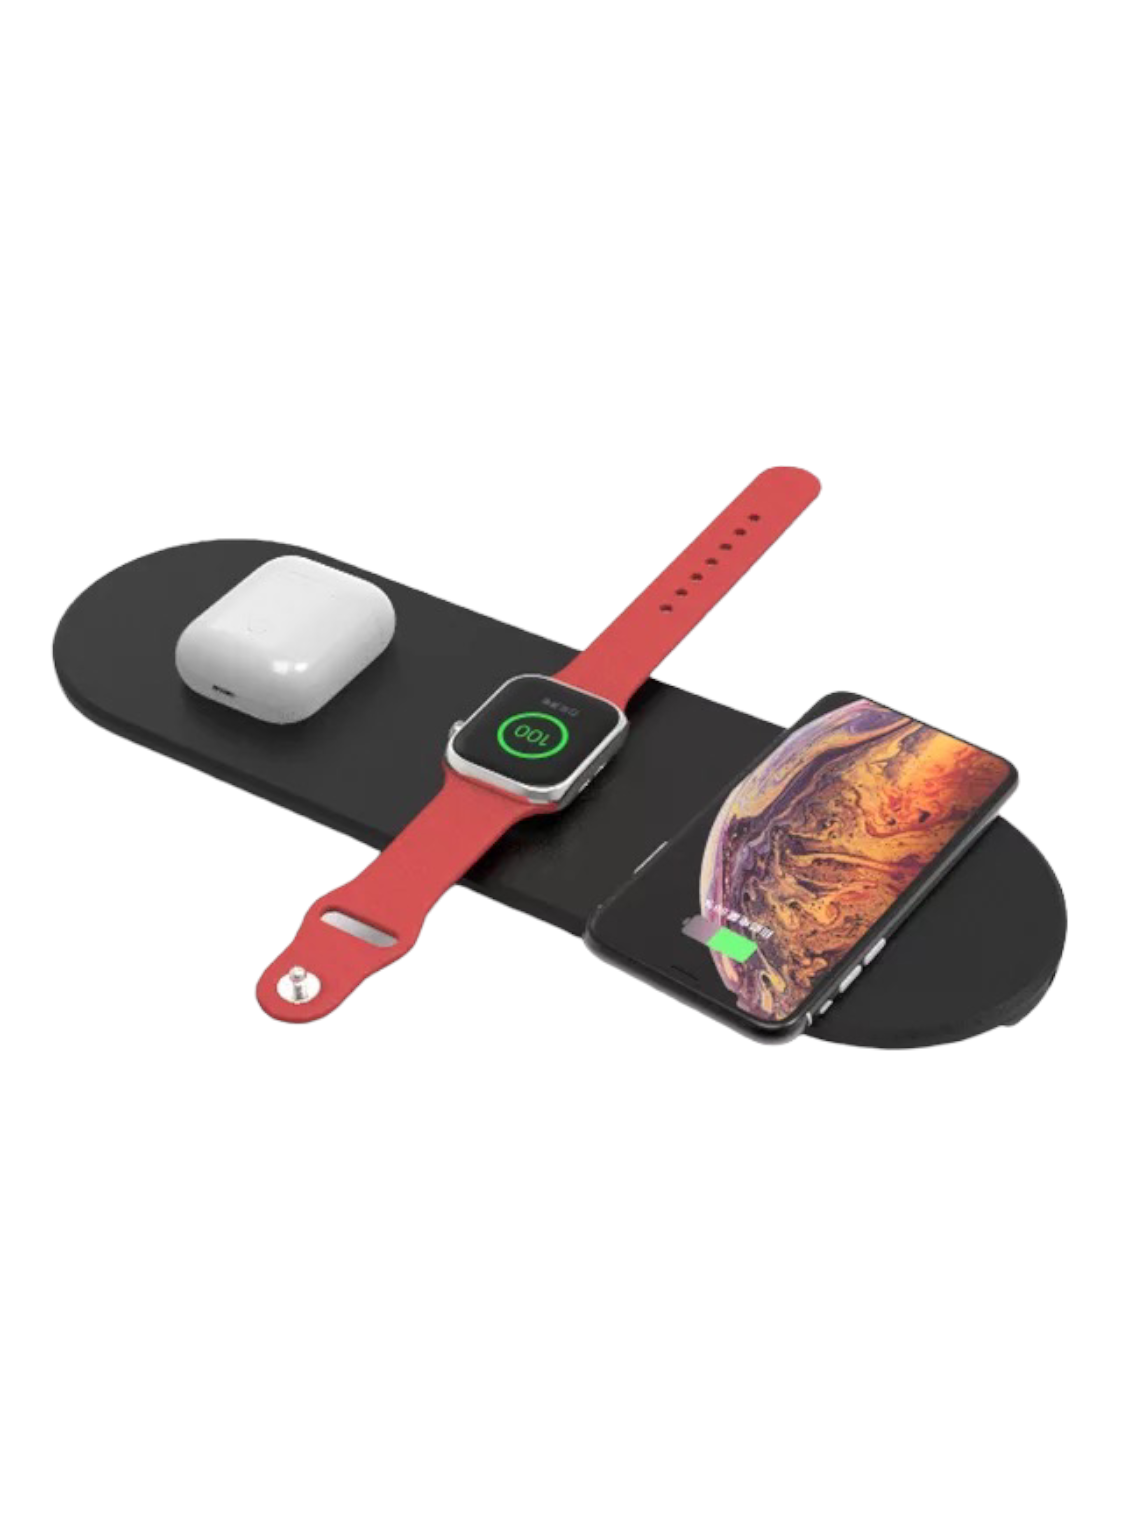 Baseus wireless charger 3 in 1